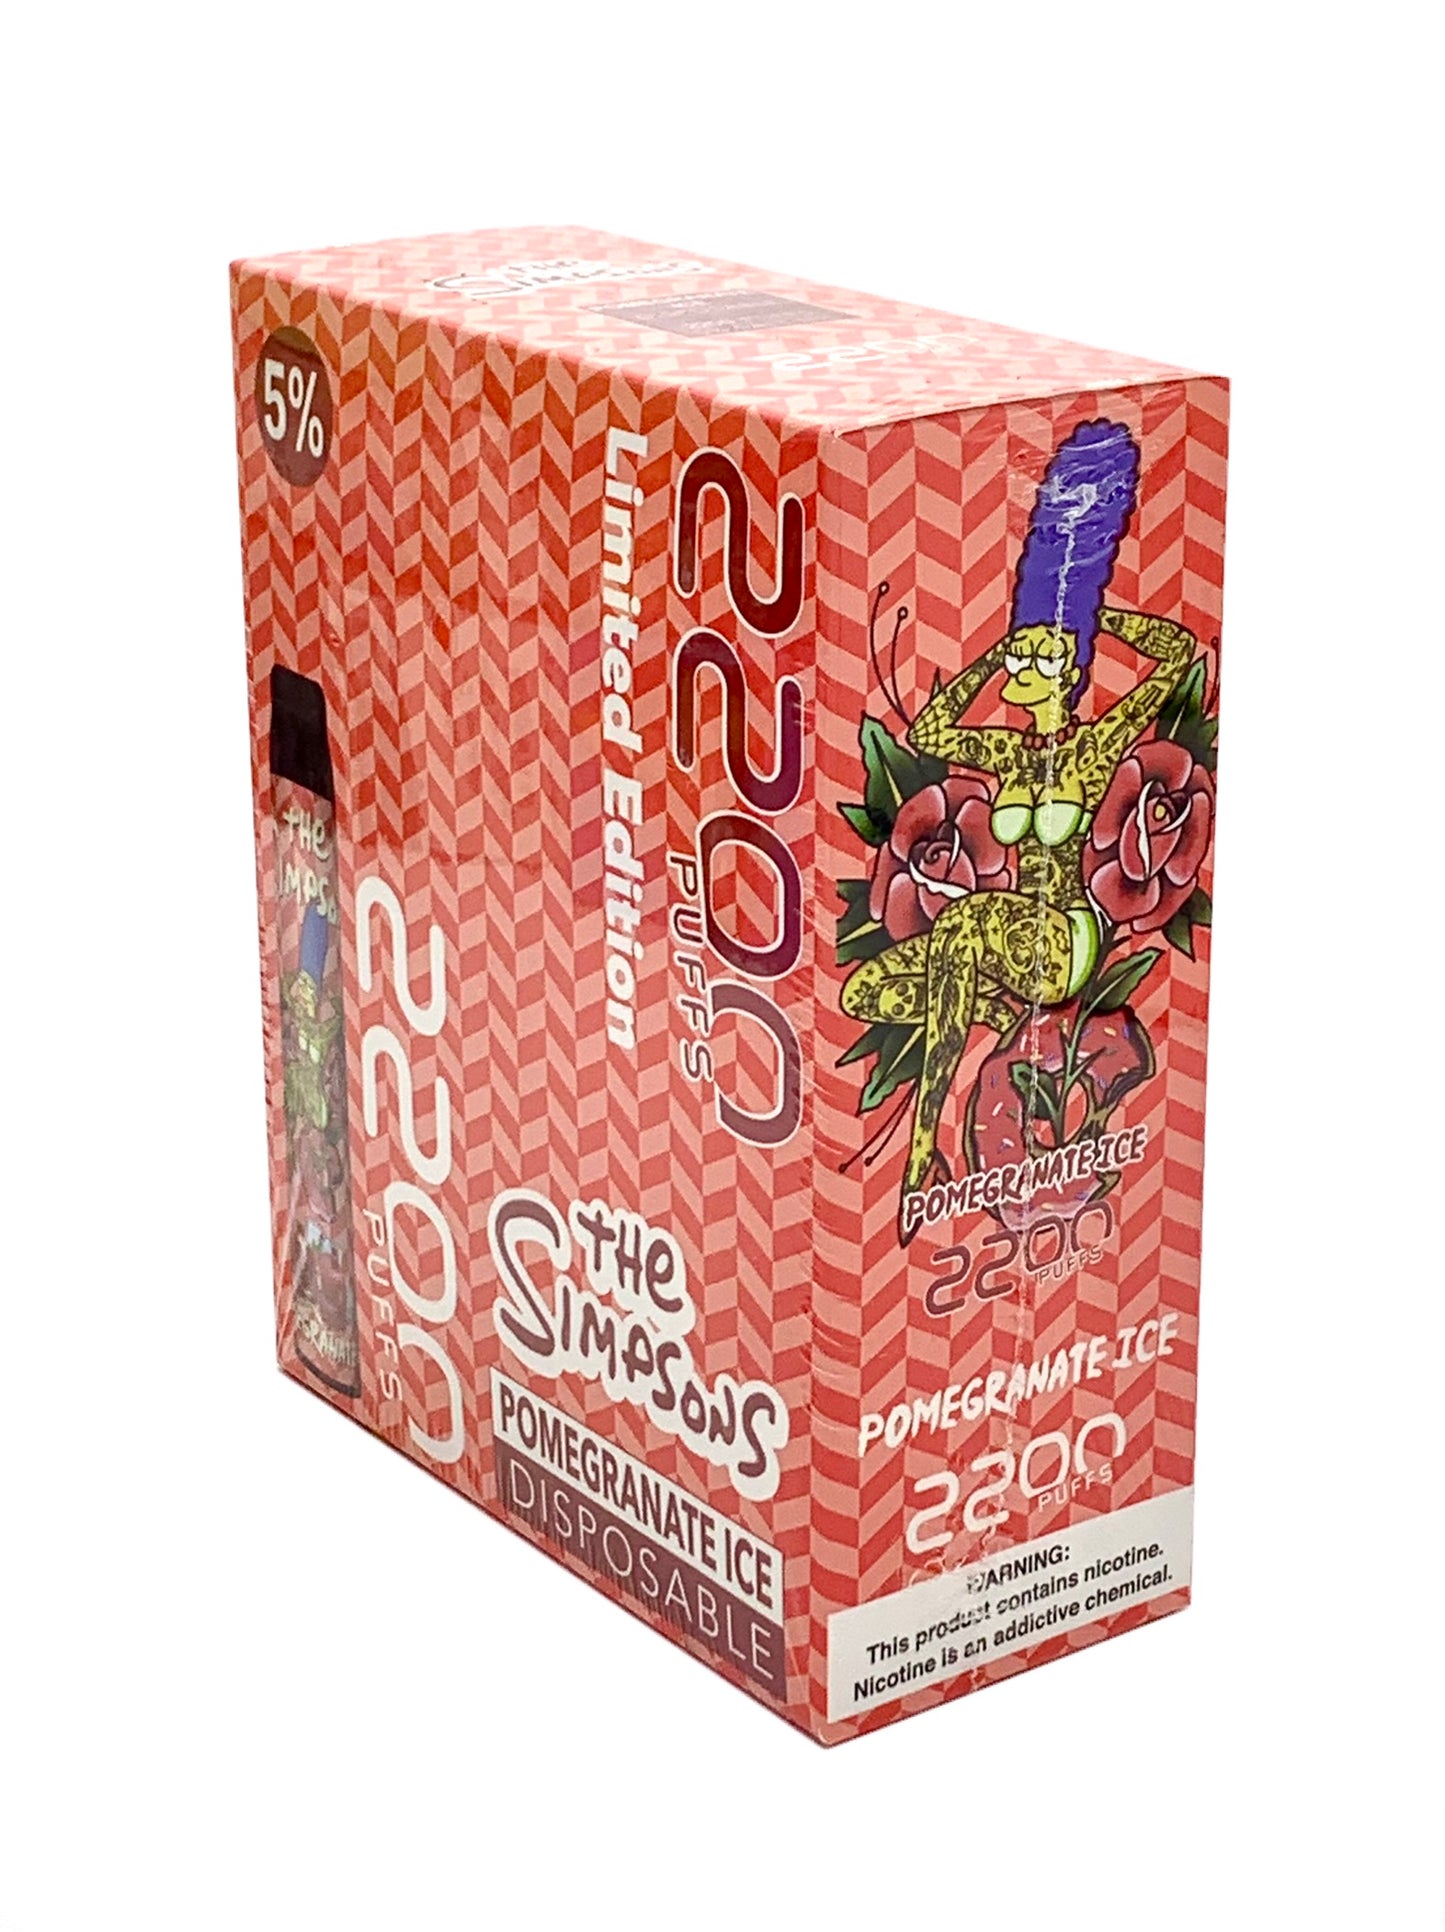 (10ct) Simpsons 2200 Puffs Pomegranate Ice $3.5 EA